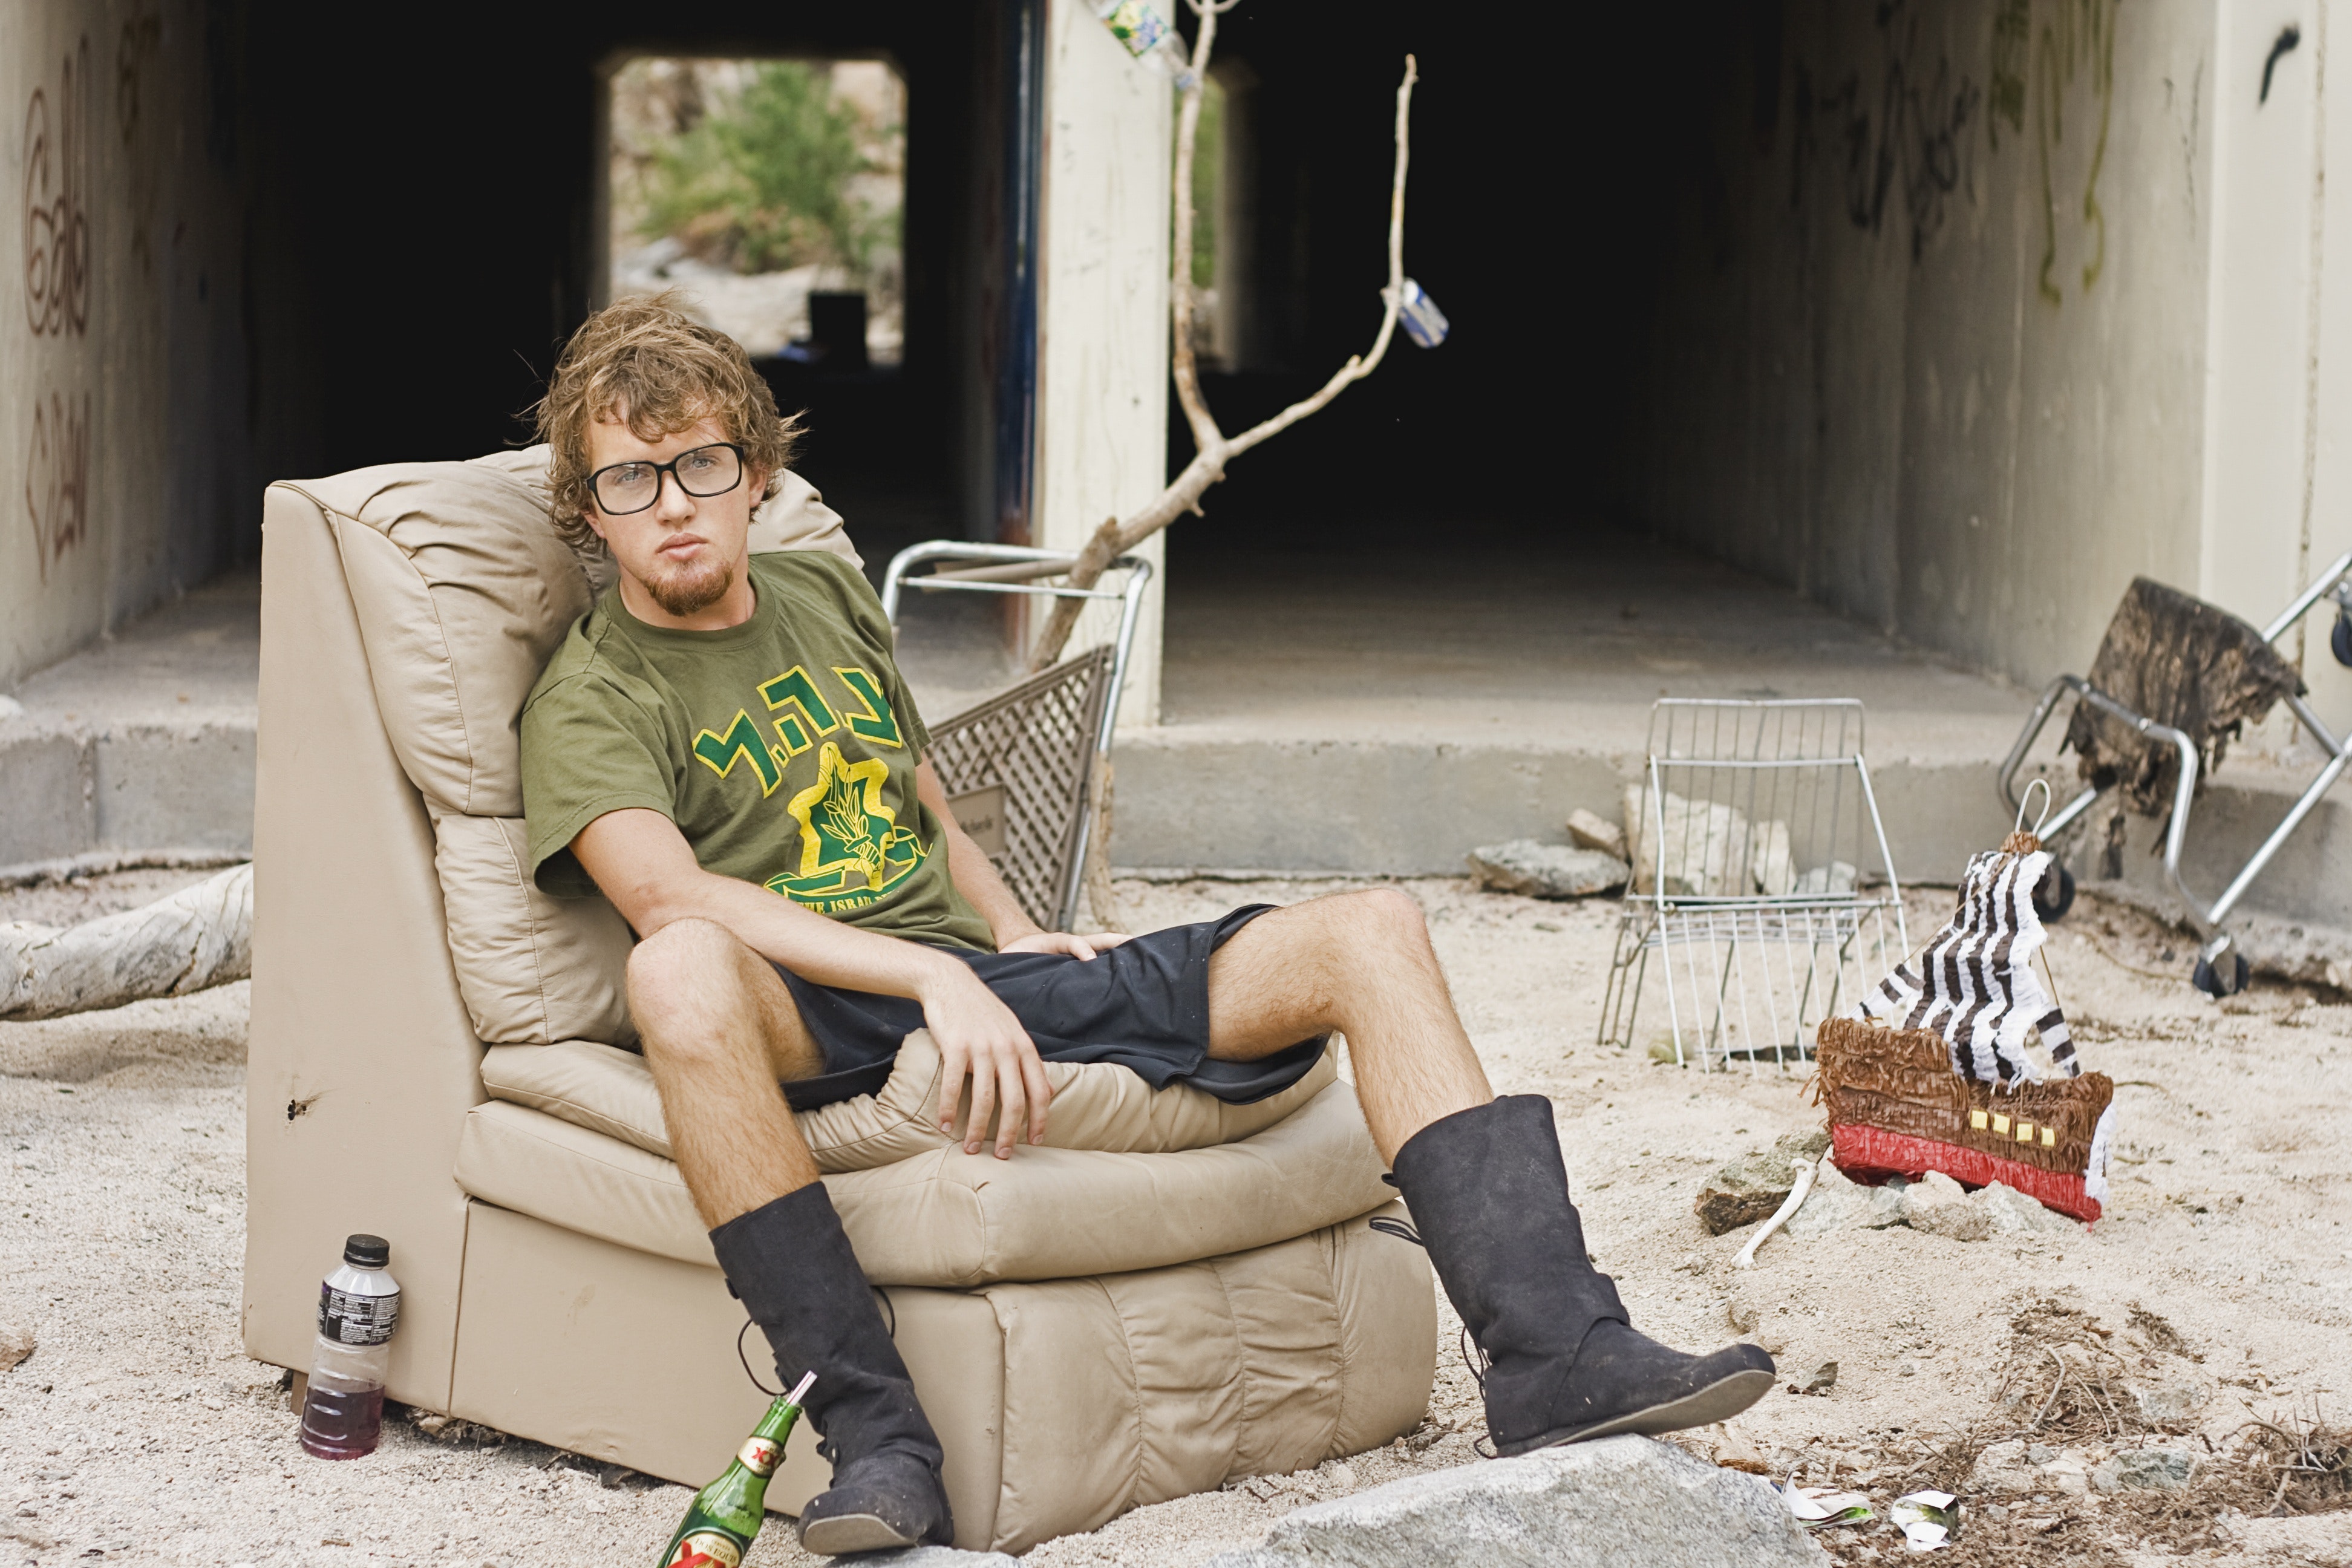 Full Length of Man Sitting Outdoors, Adult, People, Person, Poor, HQ Photo